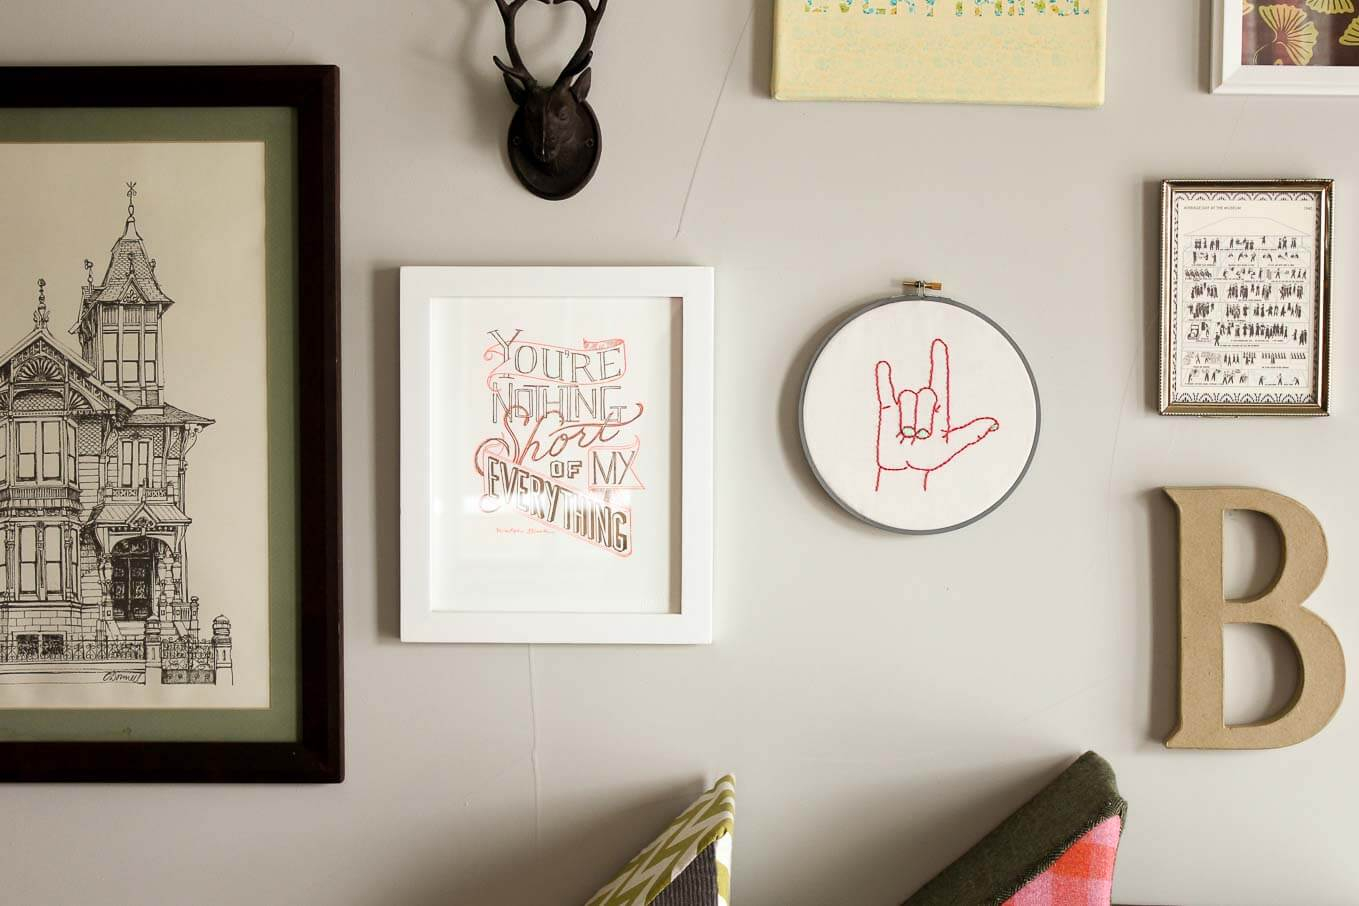 Paper Embroidery Patterns Free I Love You Free Embroidery Pattern Make Do Crew